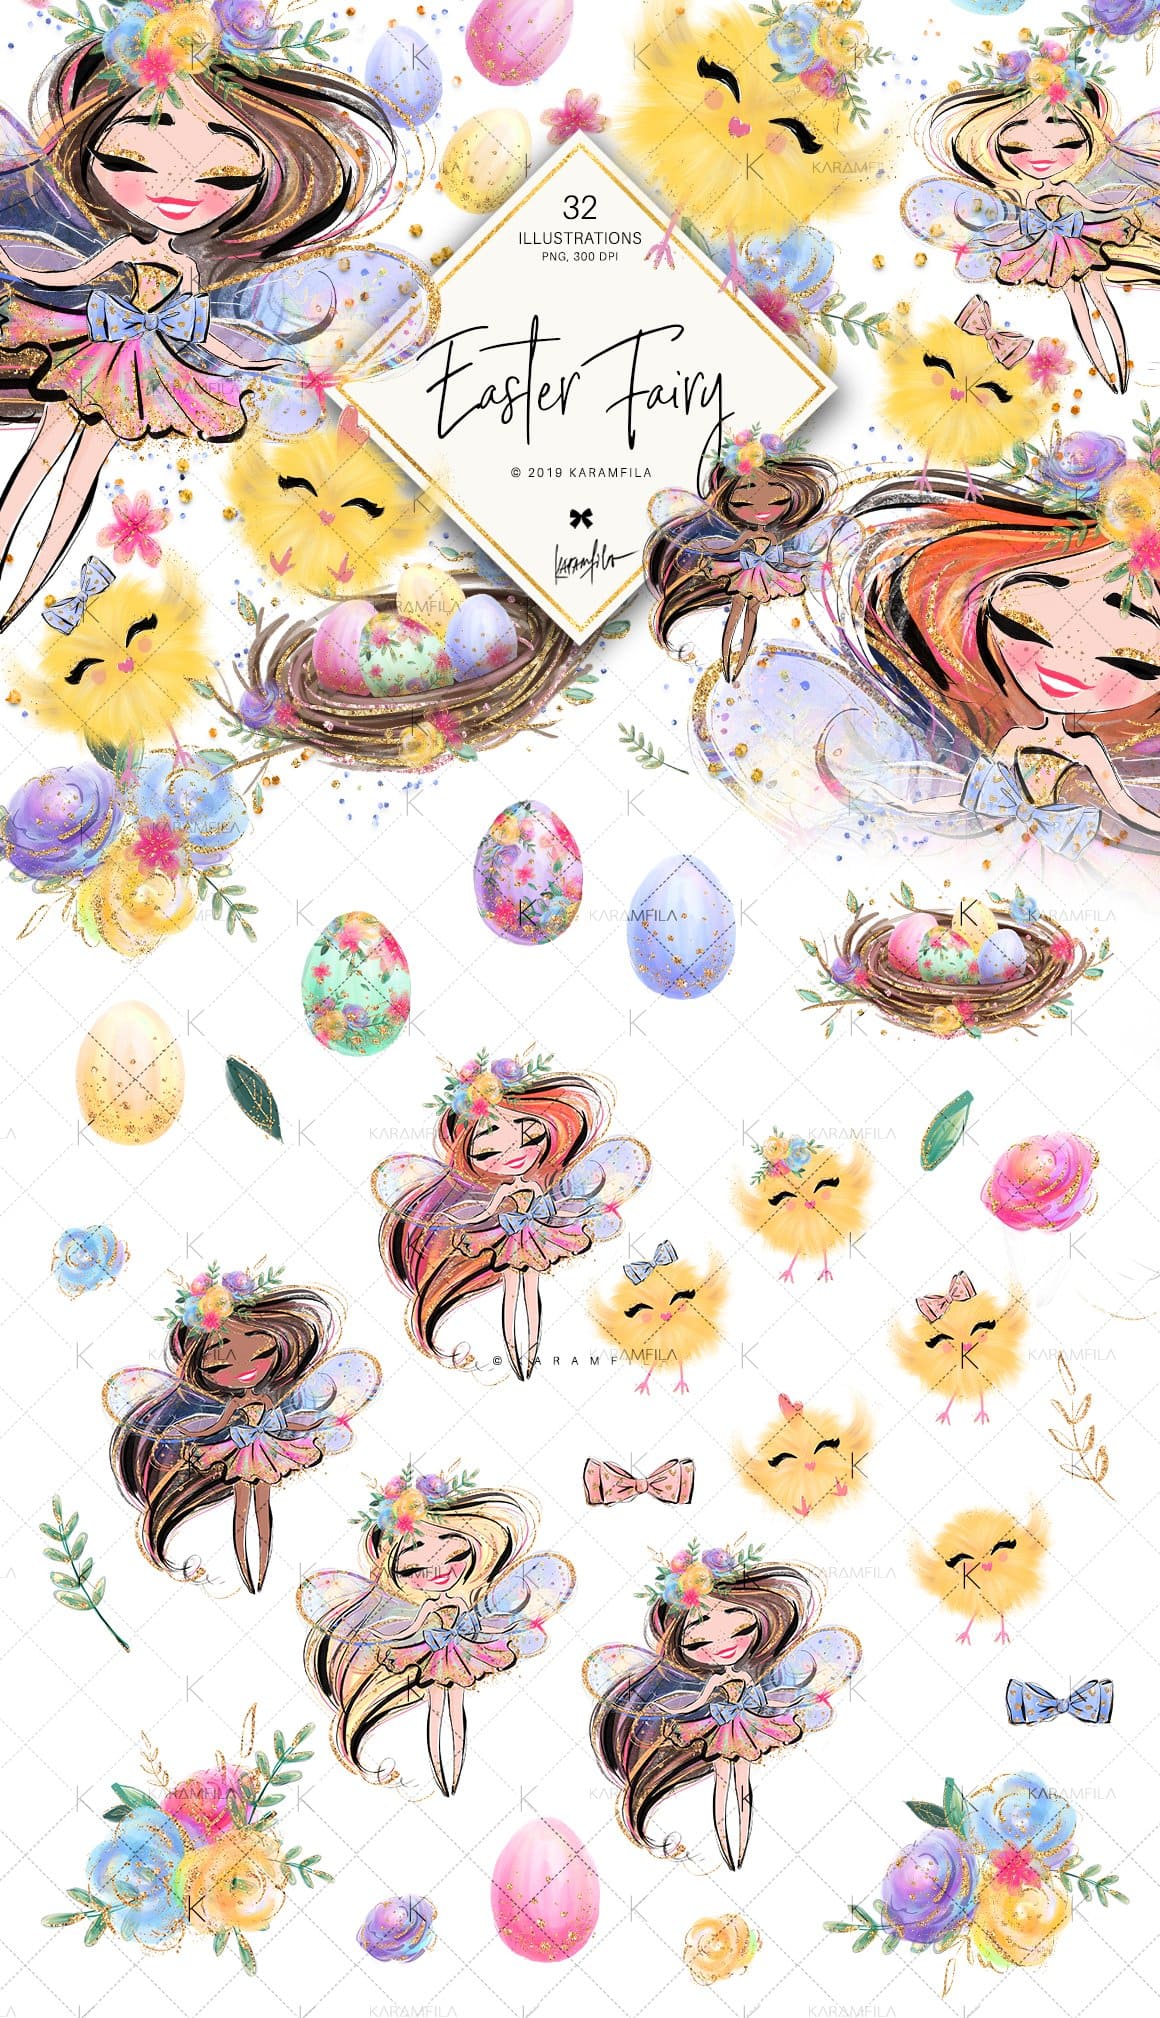 Diagonal image with illustrations from a fairy-tale Easter.